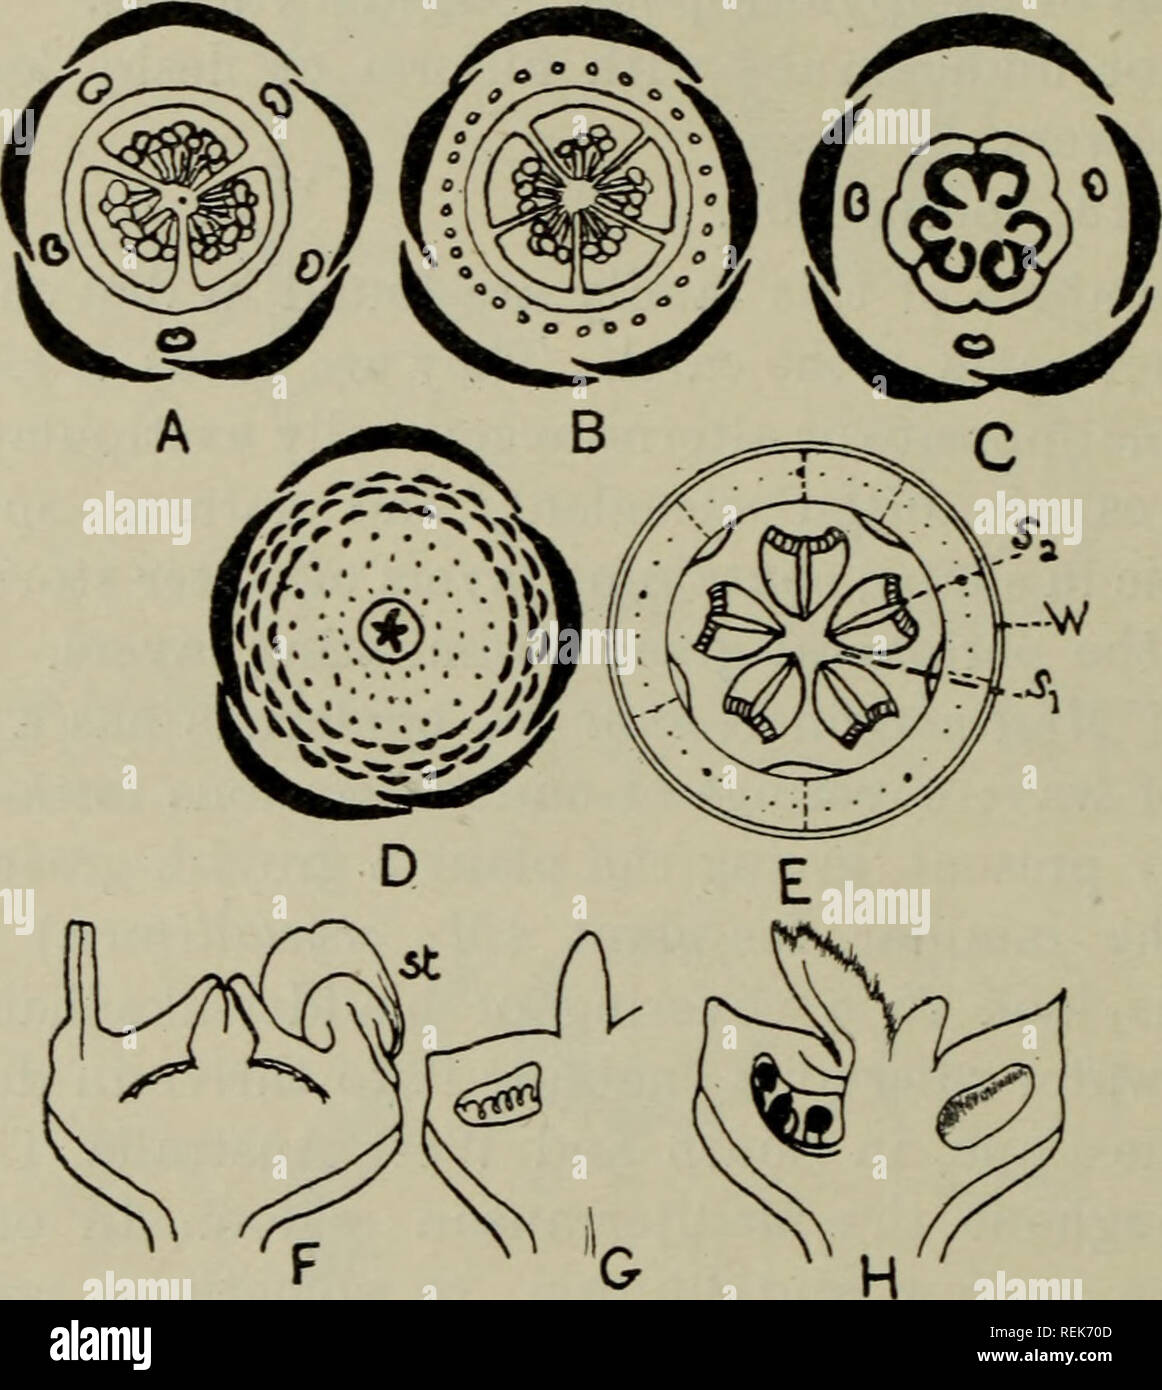 . The classification of flowering plants. Plants. 112 FLOWERING PLANTS containing three whorls, a perianth, staminal andcarpellary, as seenmSesuviumpentandrum (fig. 52, A). The number of stamens maybe reduced as inMoUugo verticillata,a, very vs,TisbheSouth American species (fig. 52, C). More often, however, spHtting of the original five staminal rudiments occurs, producing a larger number of stamens (fig. 52, B) which are free or united in bundles, or monadelphous at the base. In many cases, as. Fig. 52. A. Floral diagram of Sesuvium pentandrum. B. Floral diagram of S. Portulacastrum. C. Flor Stock Photo